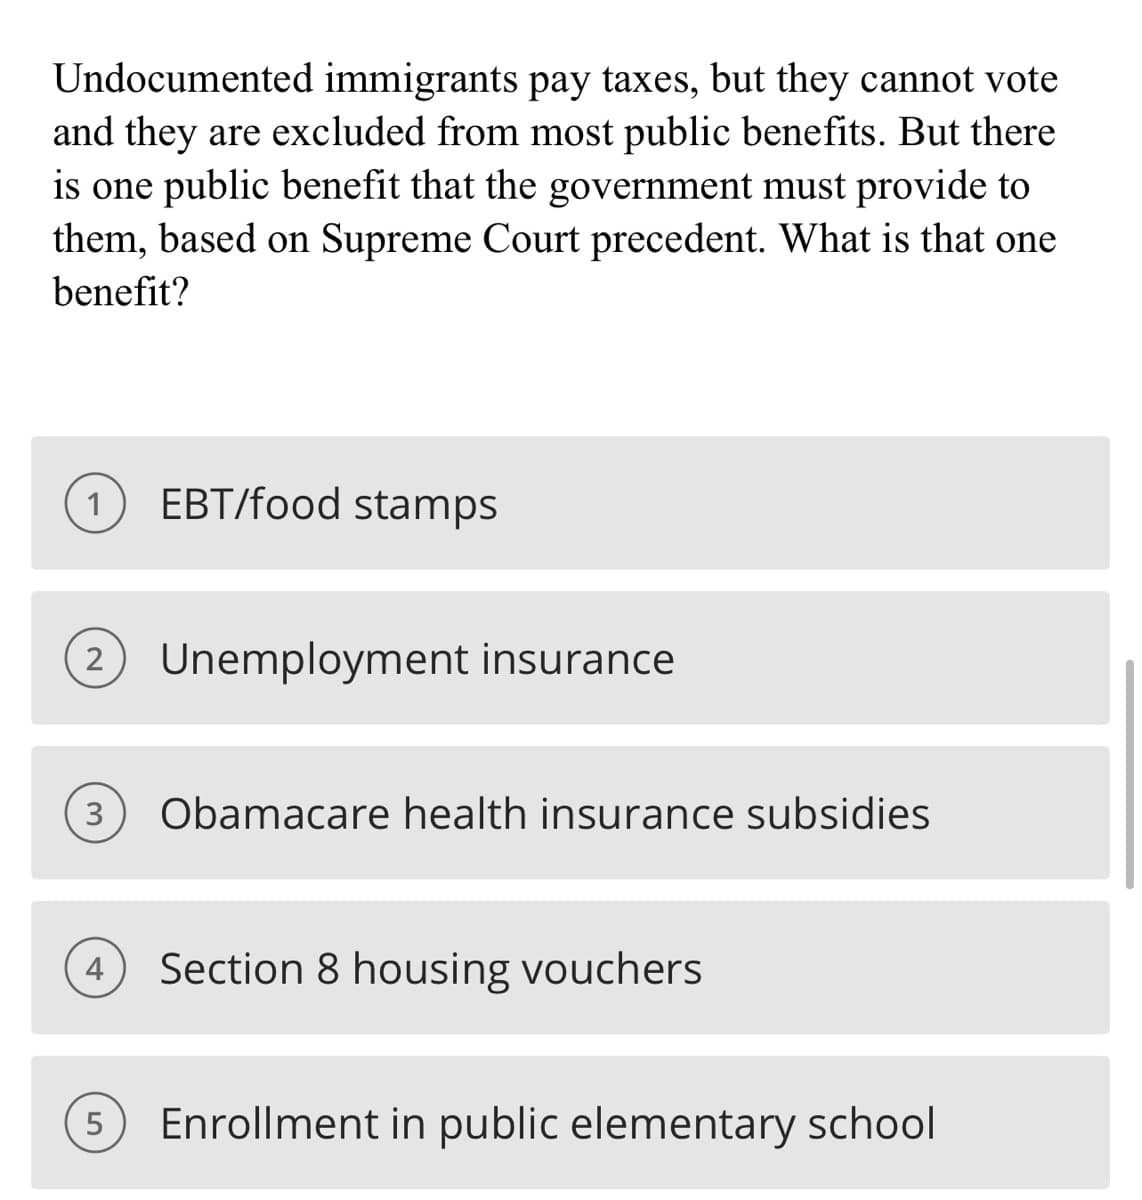 Undocumented immigrants pay taxes, but they cannot vote
and they are excluded from most public benefits. But there
is one public benefit that the government must provide to
them, based on Supreme Court precedent. What is that one
benefit?
1
EBT/food stamps
2 Unemployment insurance
3 Obamacare health insurance subsidies
Section 8 housing vouchers
5 Enrollment in public elementary school